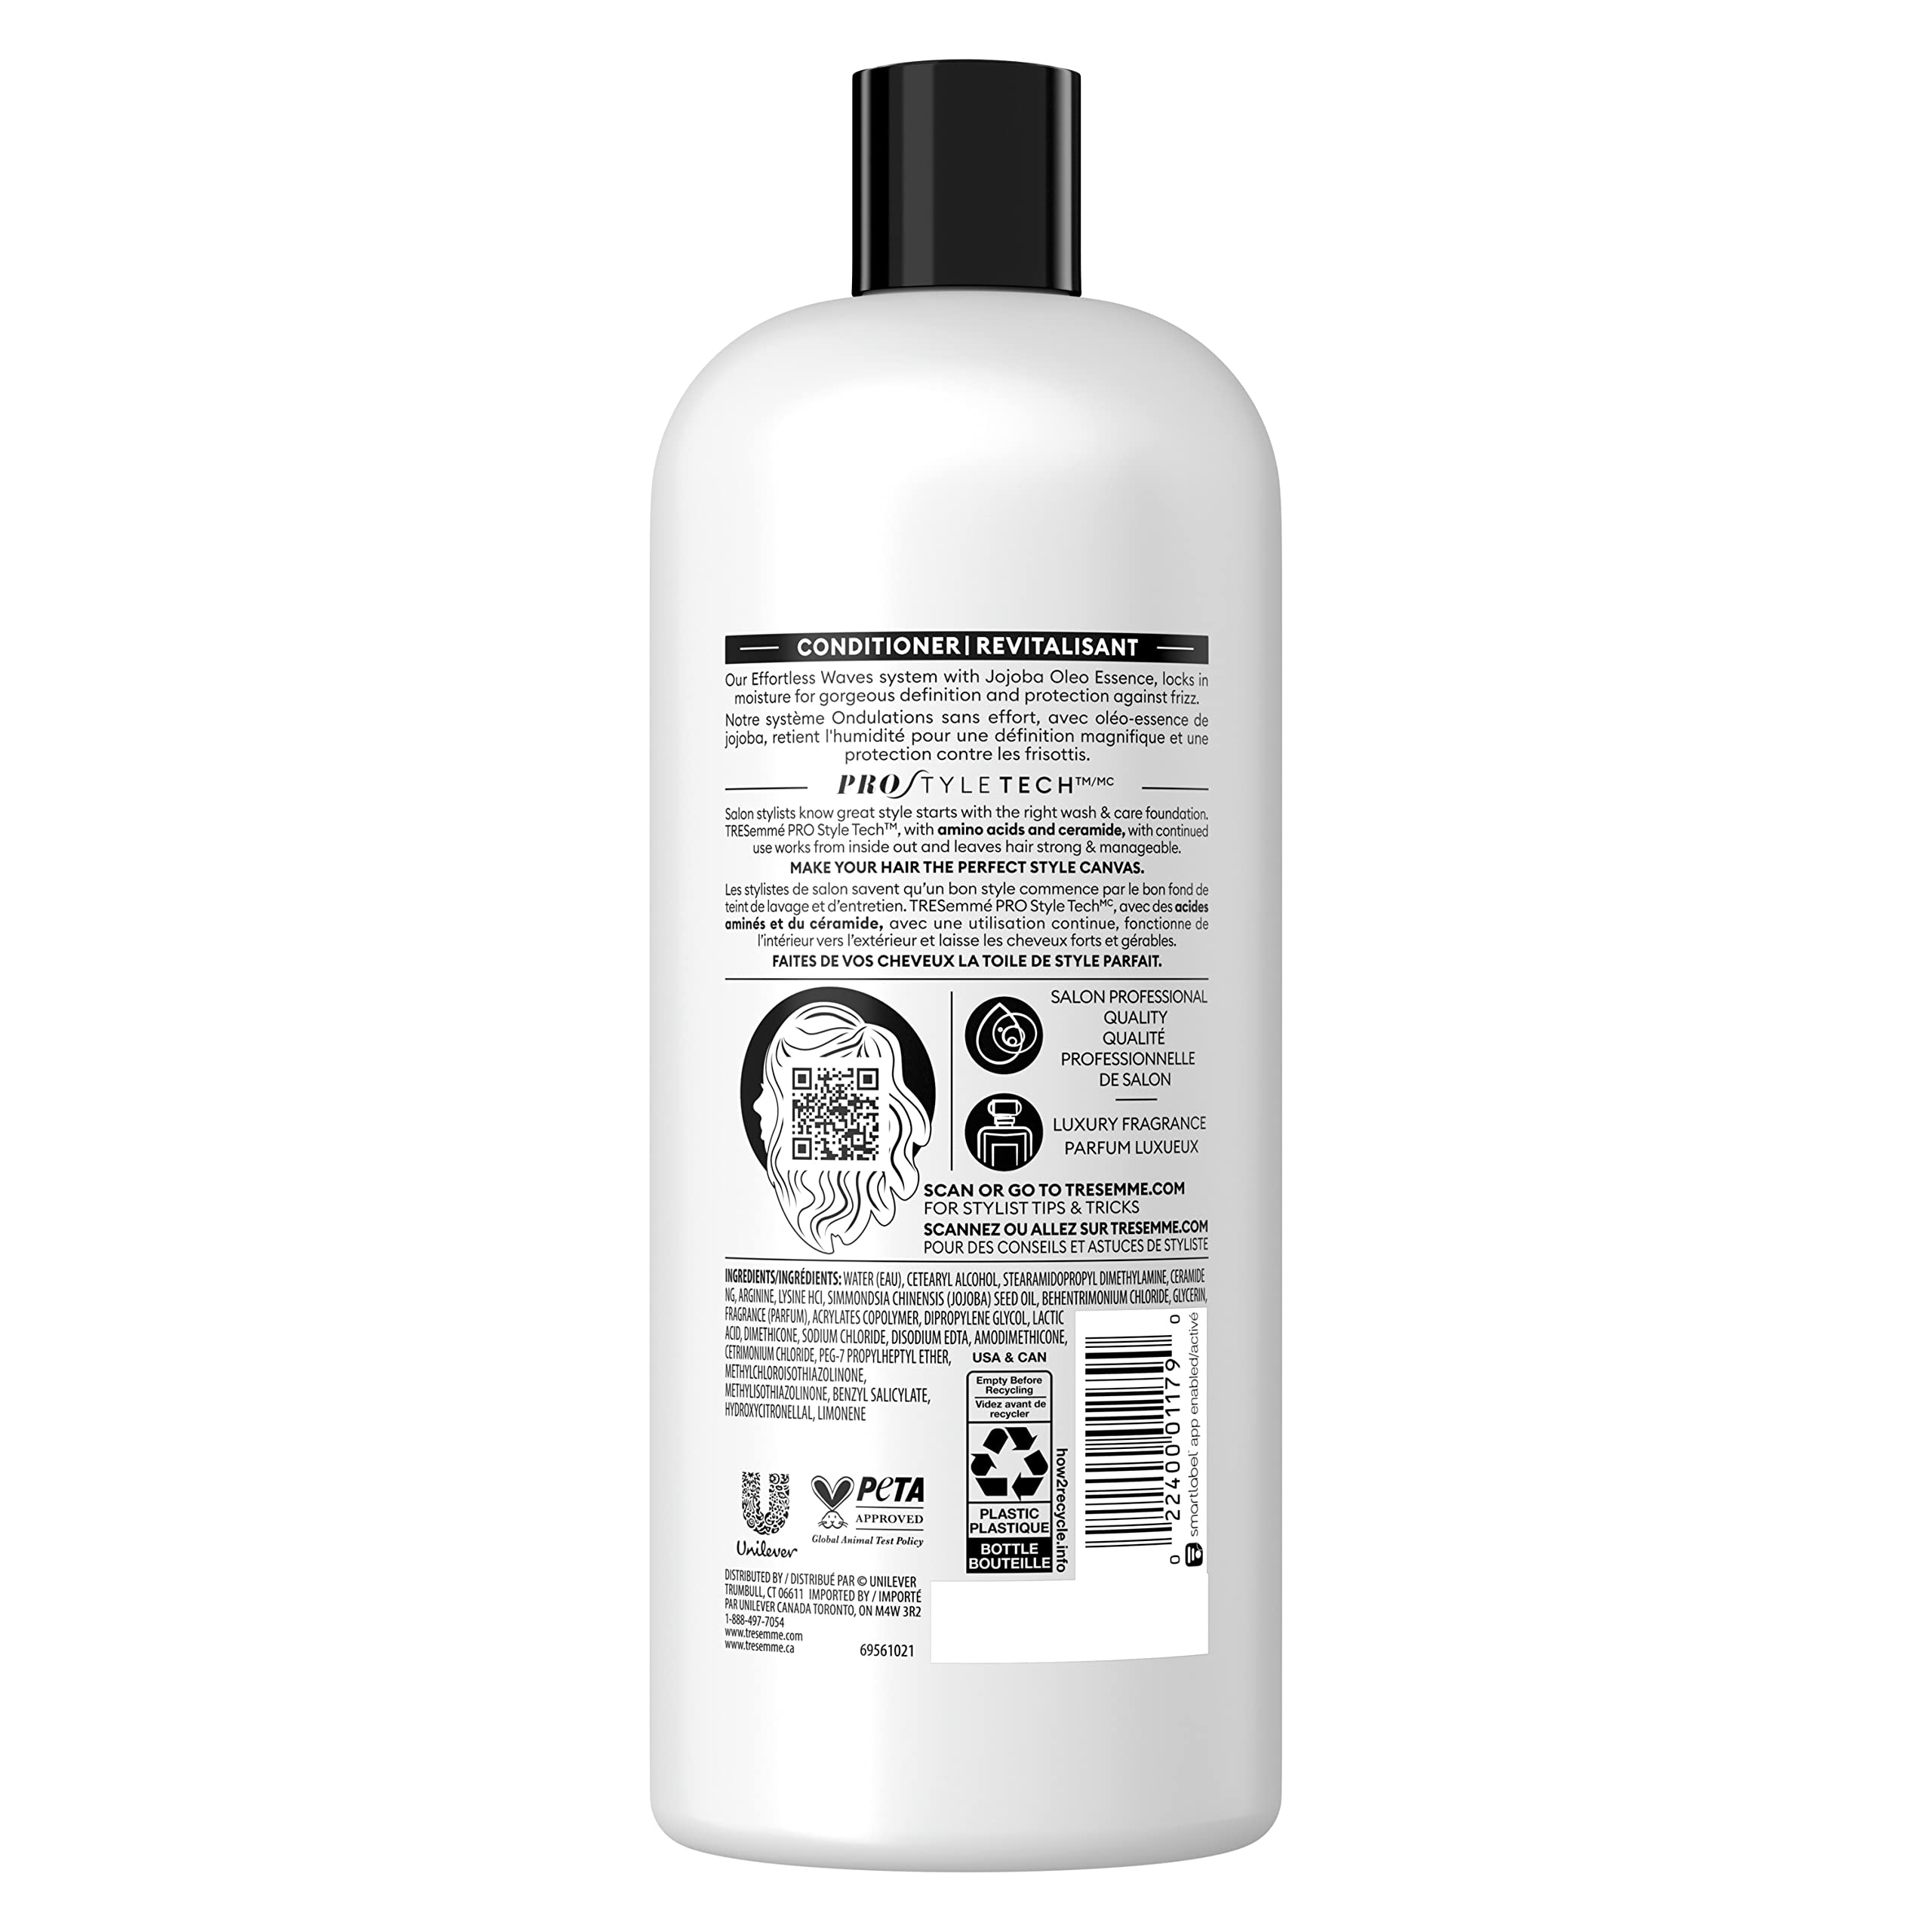 TRESemmé Hydrating Conditioner 4 Count with Jojoba Oleo Essence For Curl Definition and Frizz Protection 28 Oz